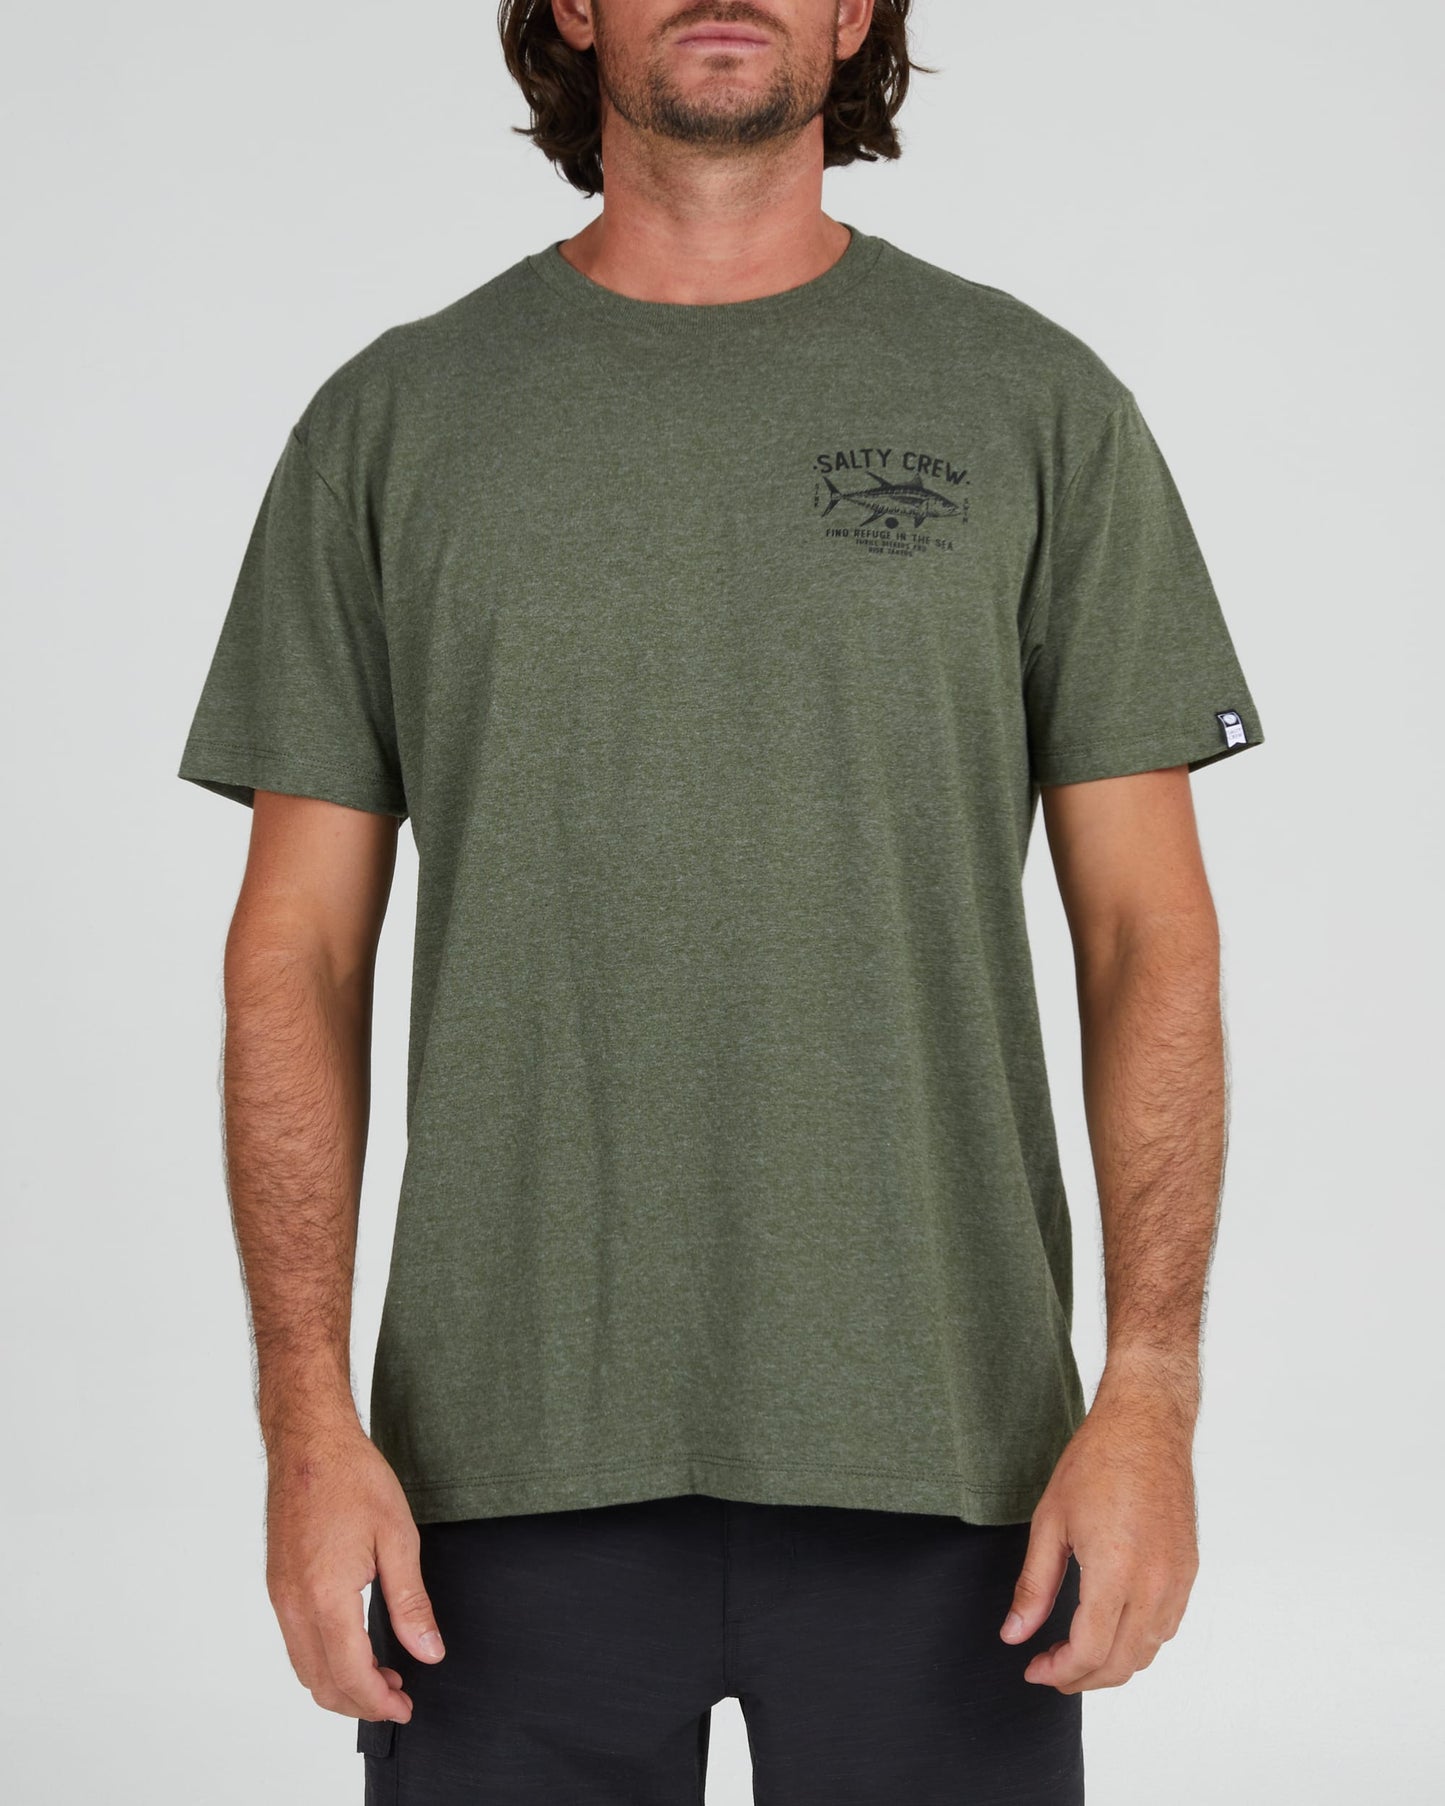 Salty crew T-SHIRTS S/S MARKET STANDARD S/S TEE - Forest Heather  en Forest Heather